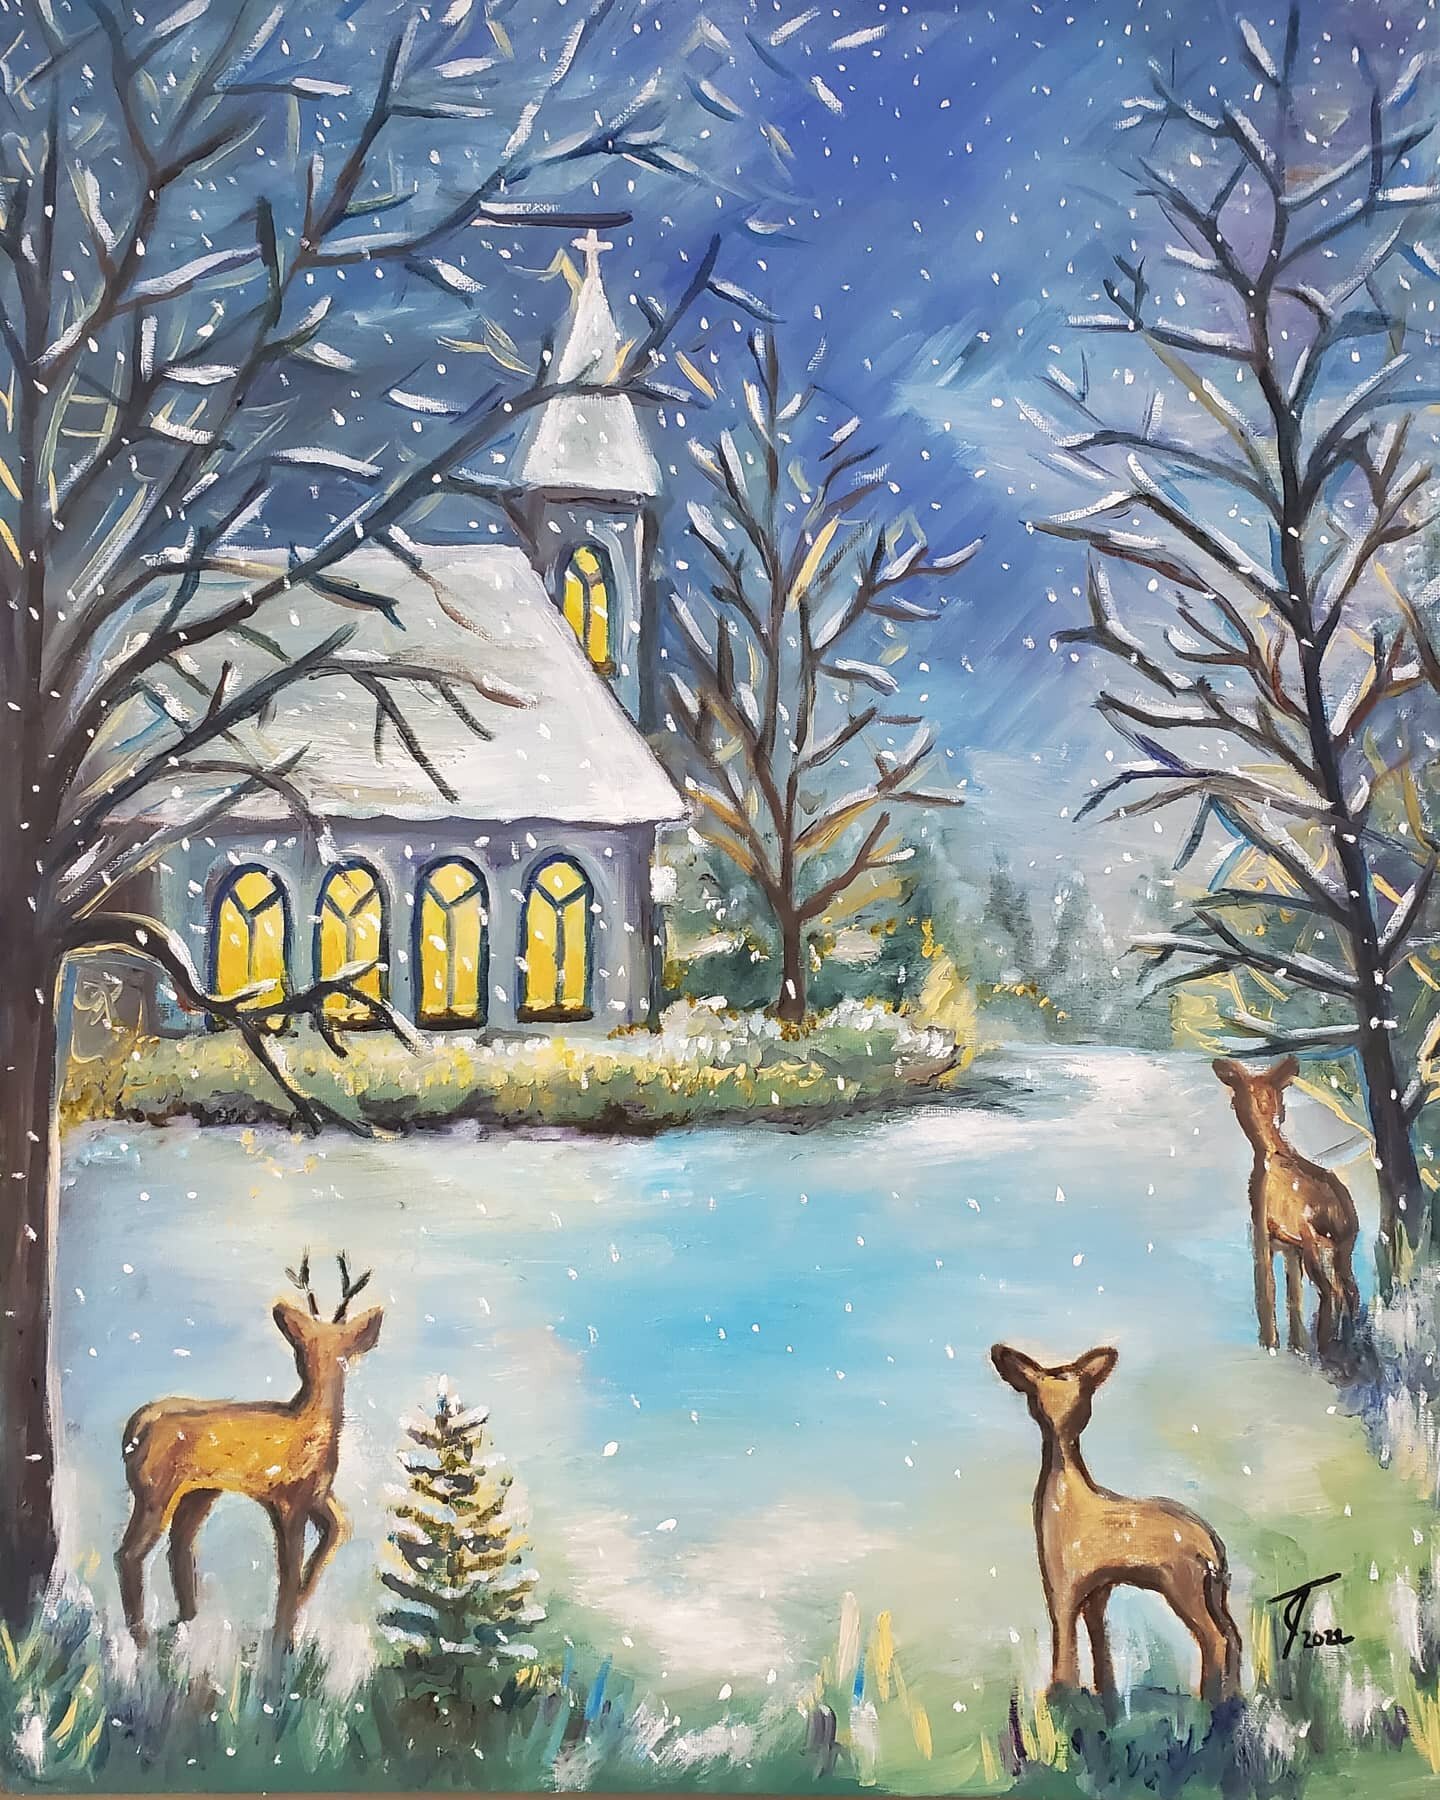 Another completed commission:)

Snony evening by a Church.

#only1joeyart #only1joey #Commission #art #artist #localartists #yoco #yorkmakesart #yorkpa #representyork #oilpainting #snowychurch #deer